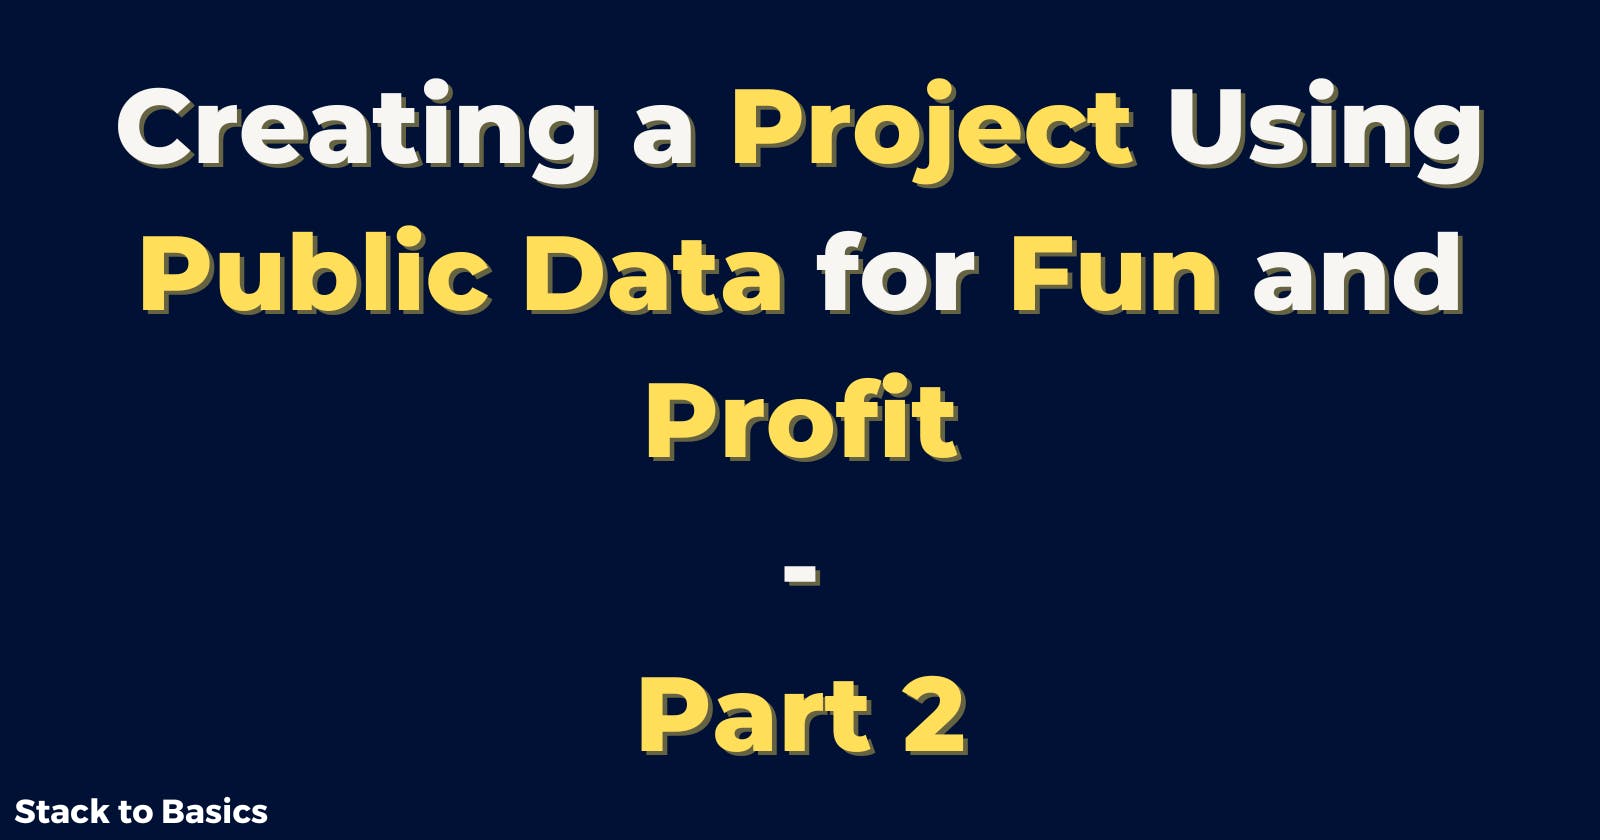 Creating a Project Using Public Data for Fun and Profit: Part 2